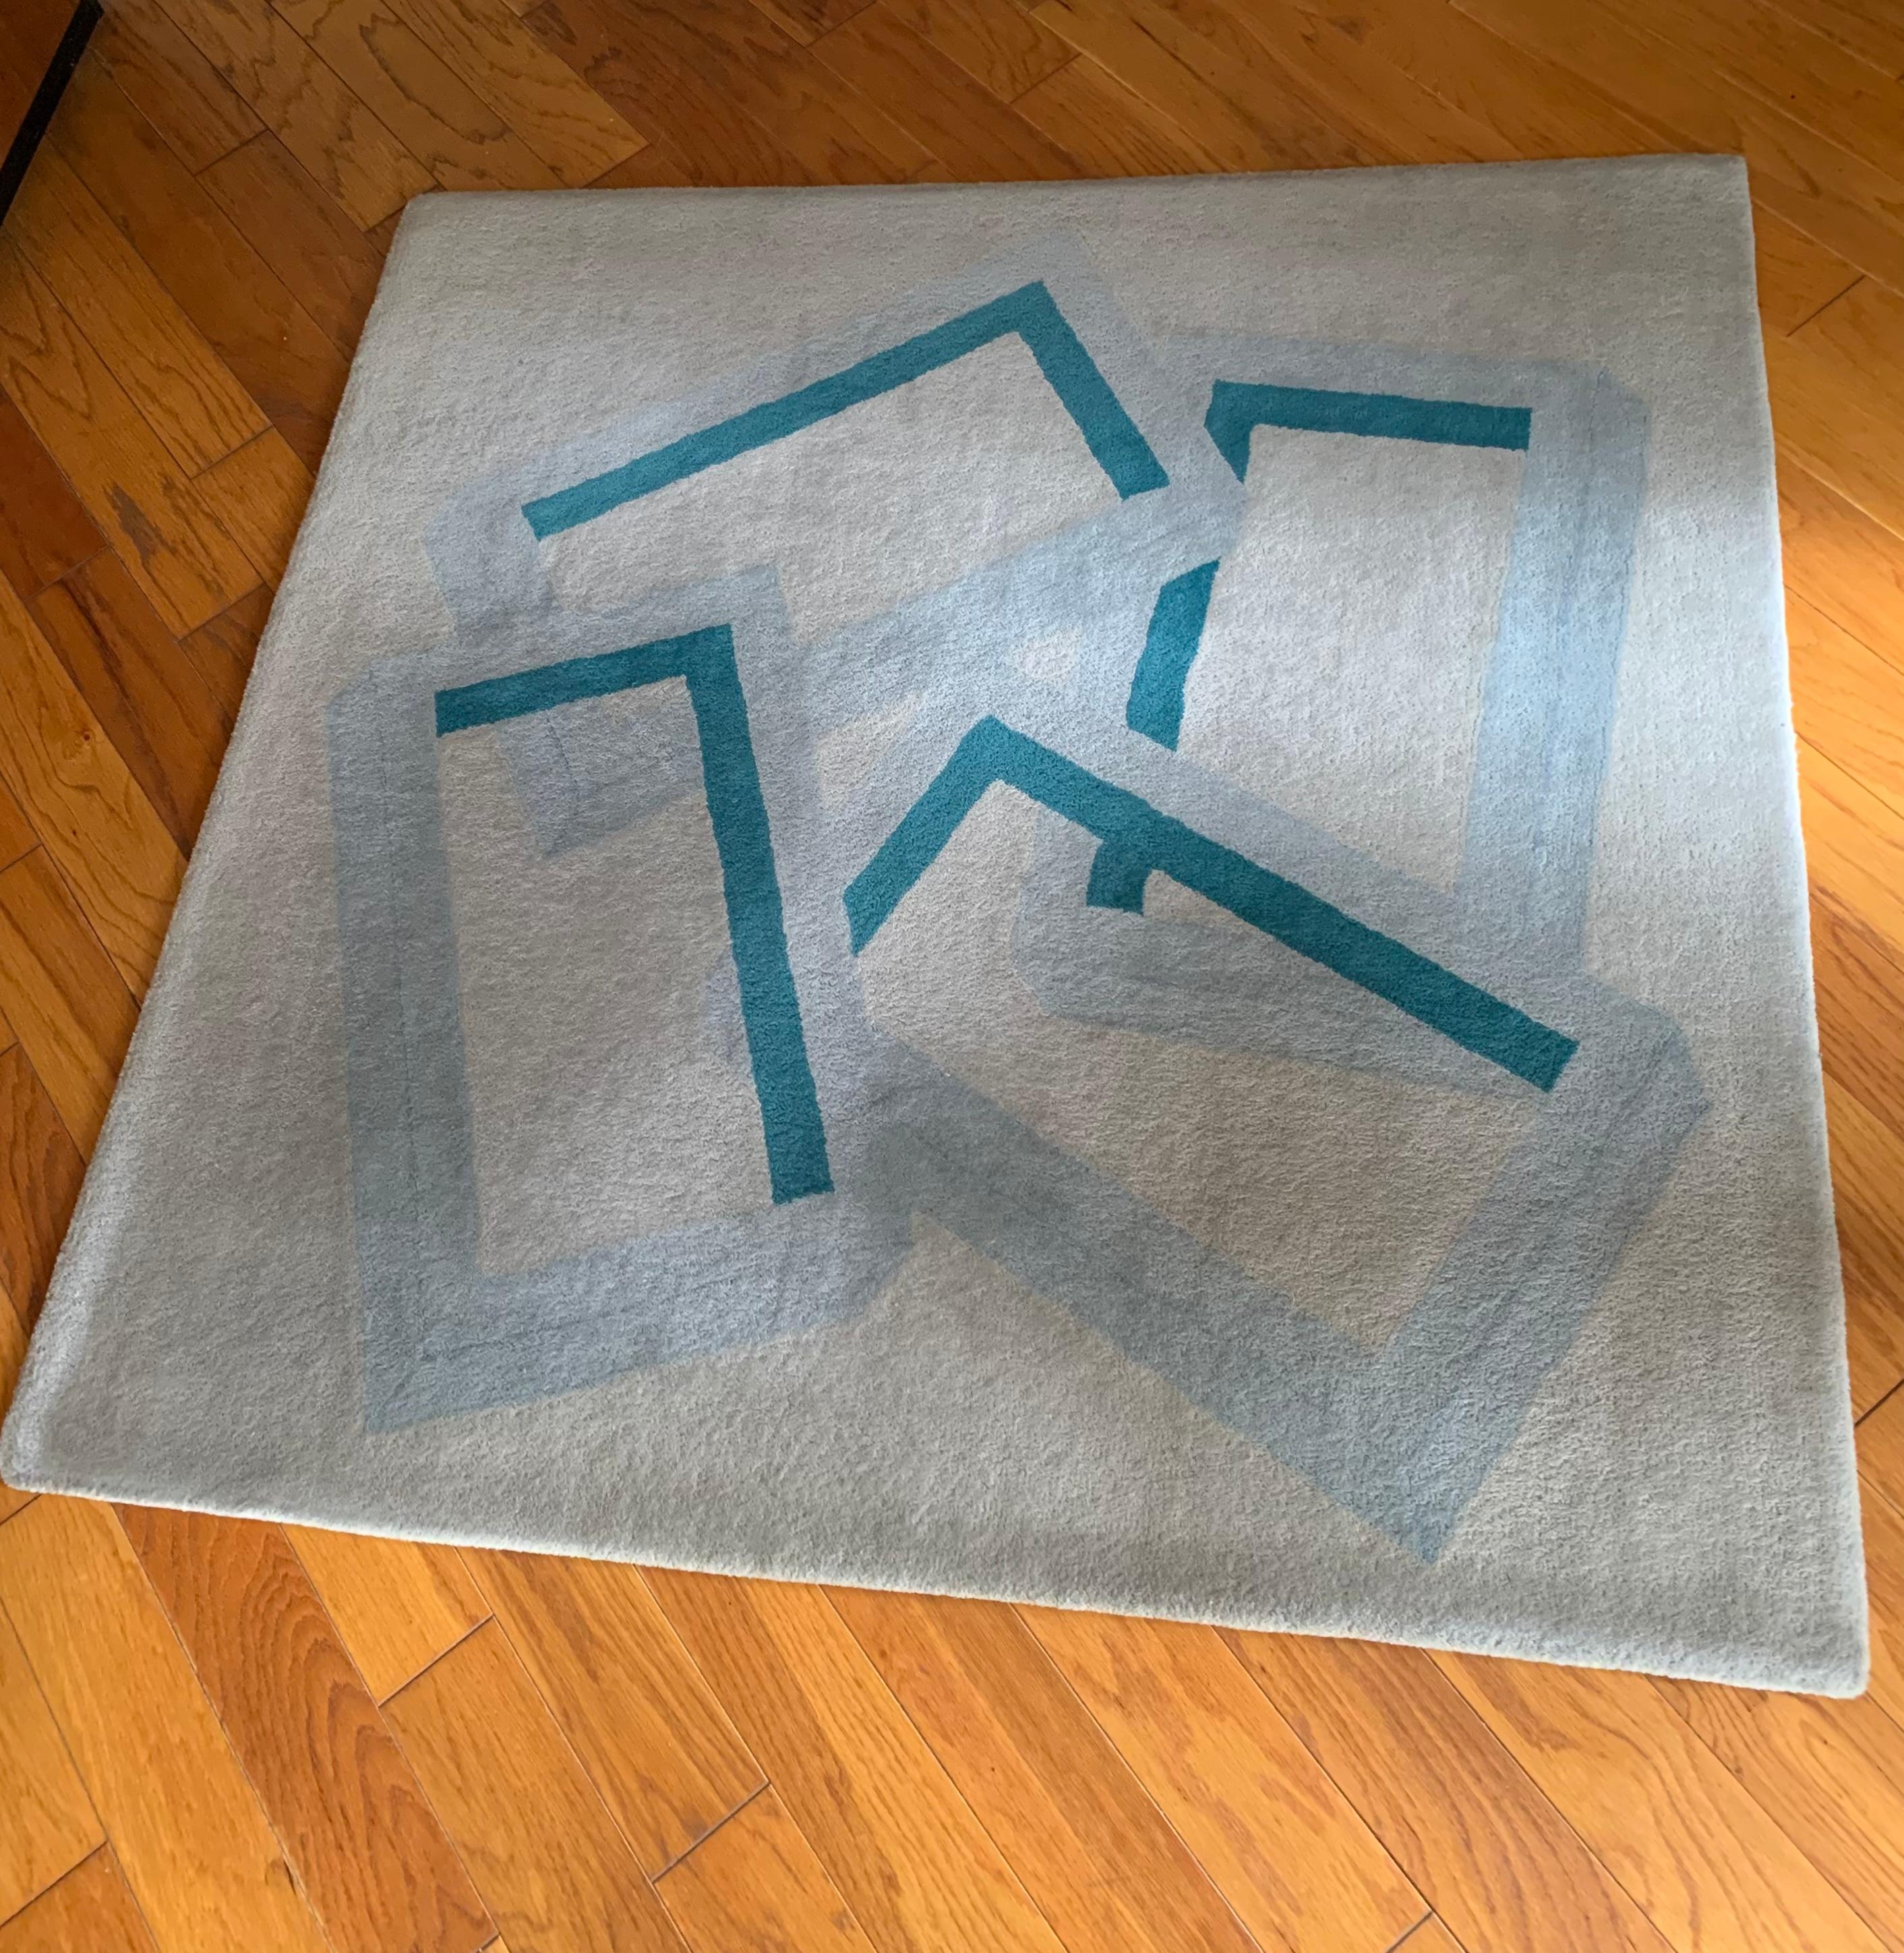 Vintage Ettore Sottsass design fine wool carpet executed by Tisca, hand made in France.
Tisca carpets are described as poetry for the feet, rightly so, as the thick, lush 100% wool surface will have your toes singing its praises. Hand made and